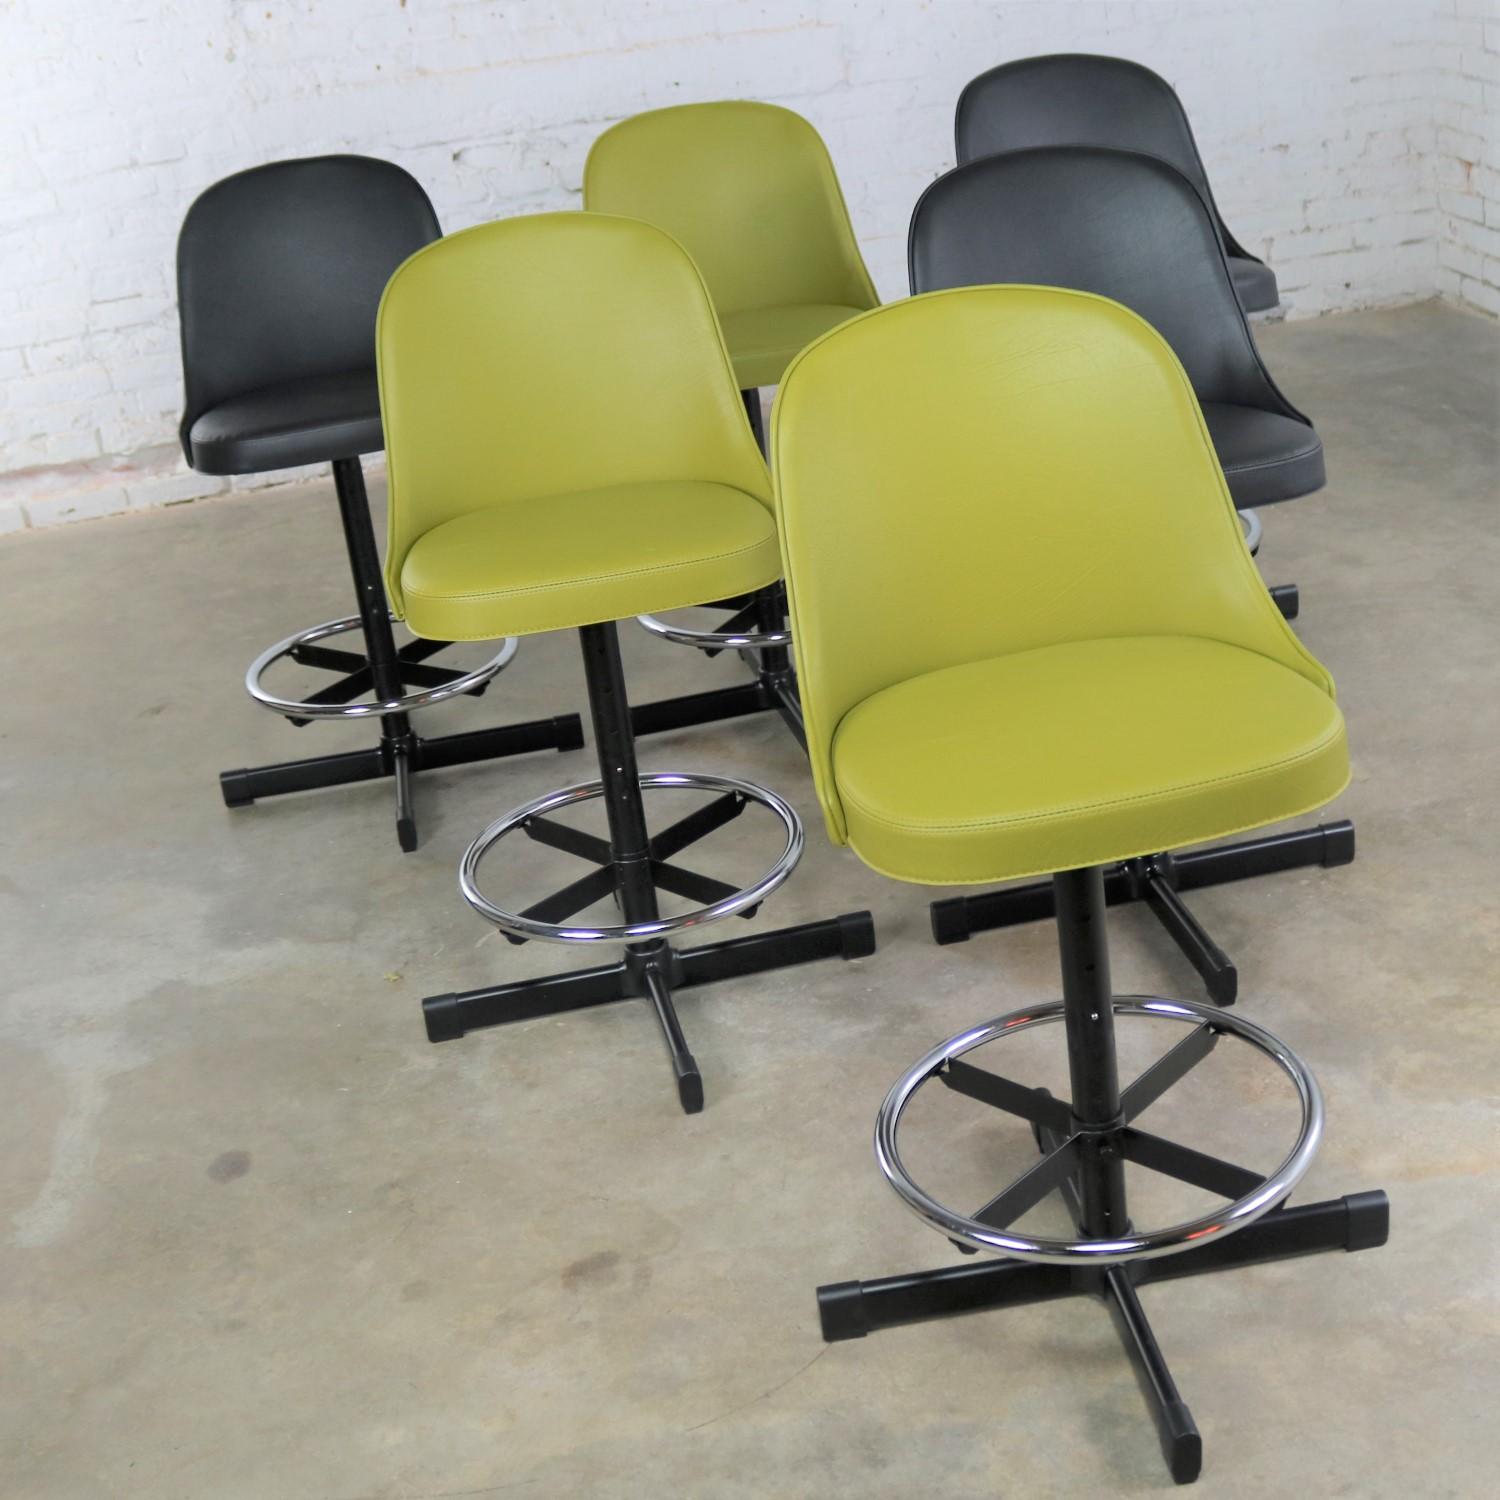 Handsome Samsonite Mid-Century Modern adjustable bar or counter stools. They have multiple adjustment positions. These awesome stools are NOS, new old stock. There are 2 sets of 3. You may choose black Naugahyde or asparagus Naugahyde. They are